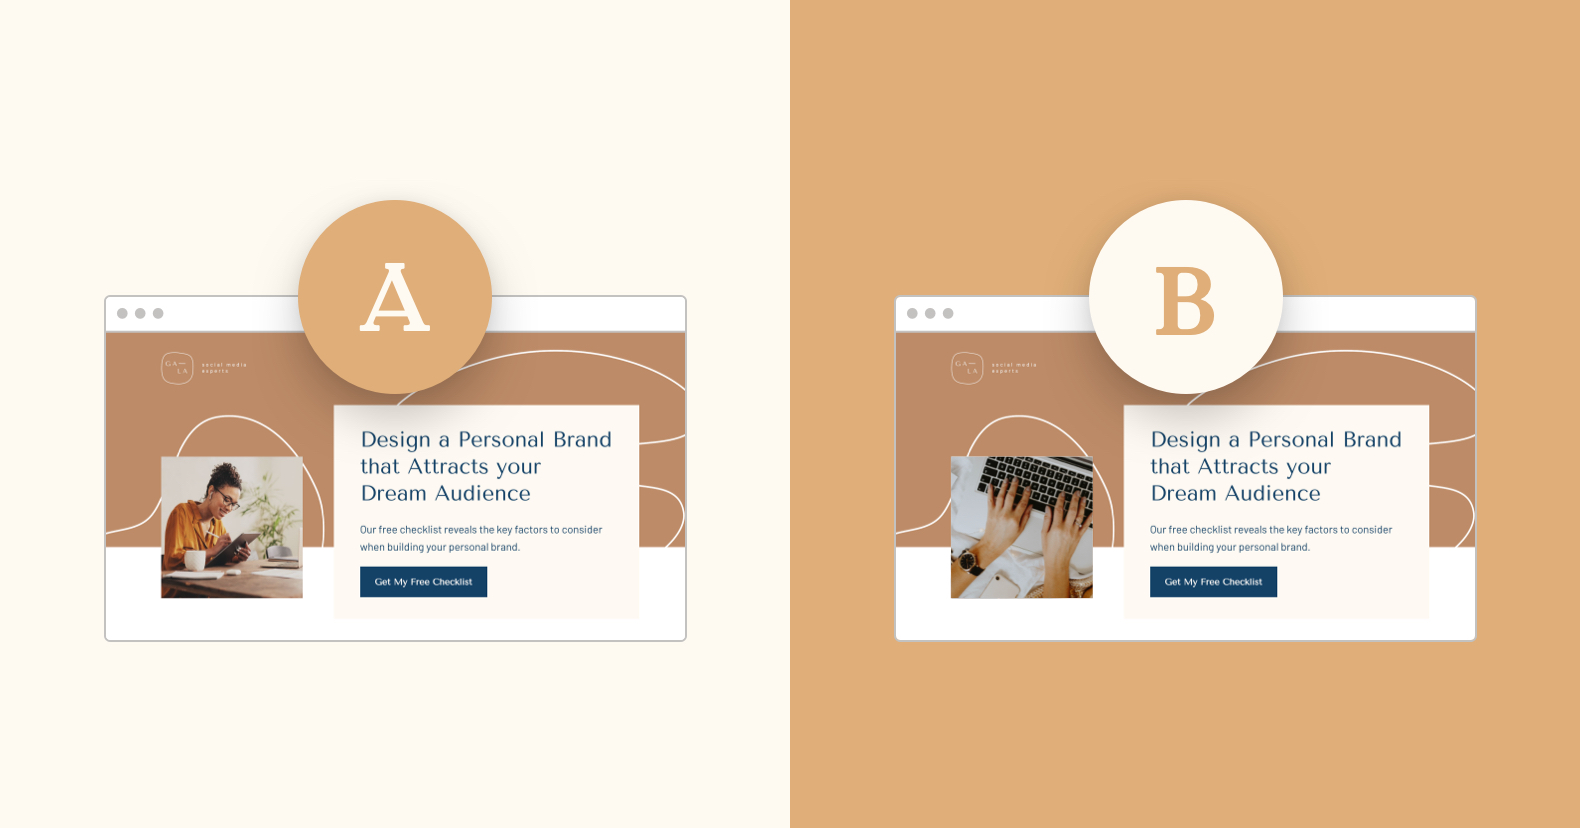 From Curiosity to High-Conversion: A Guide to A/B Testing Your Landing Page